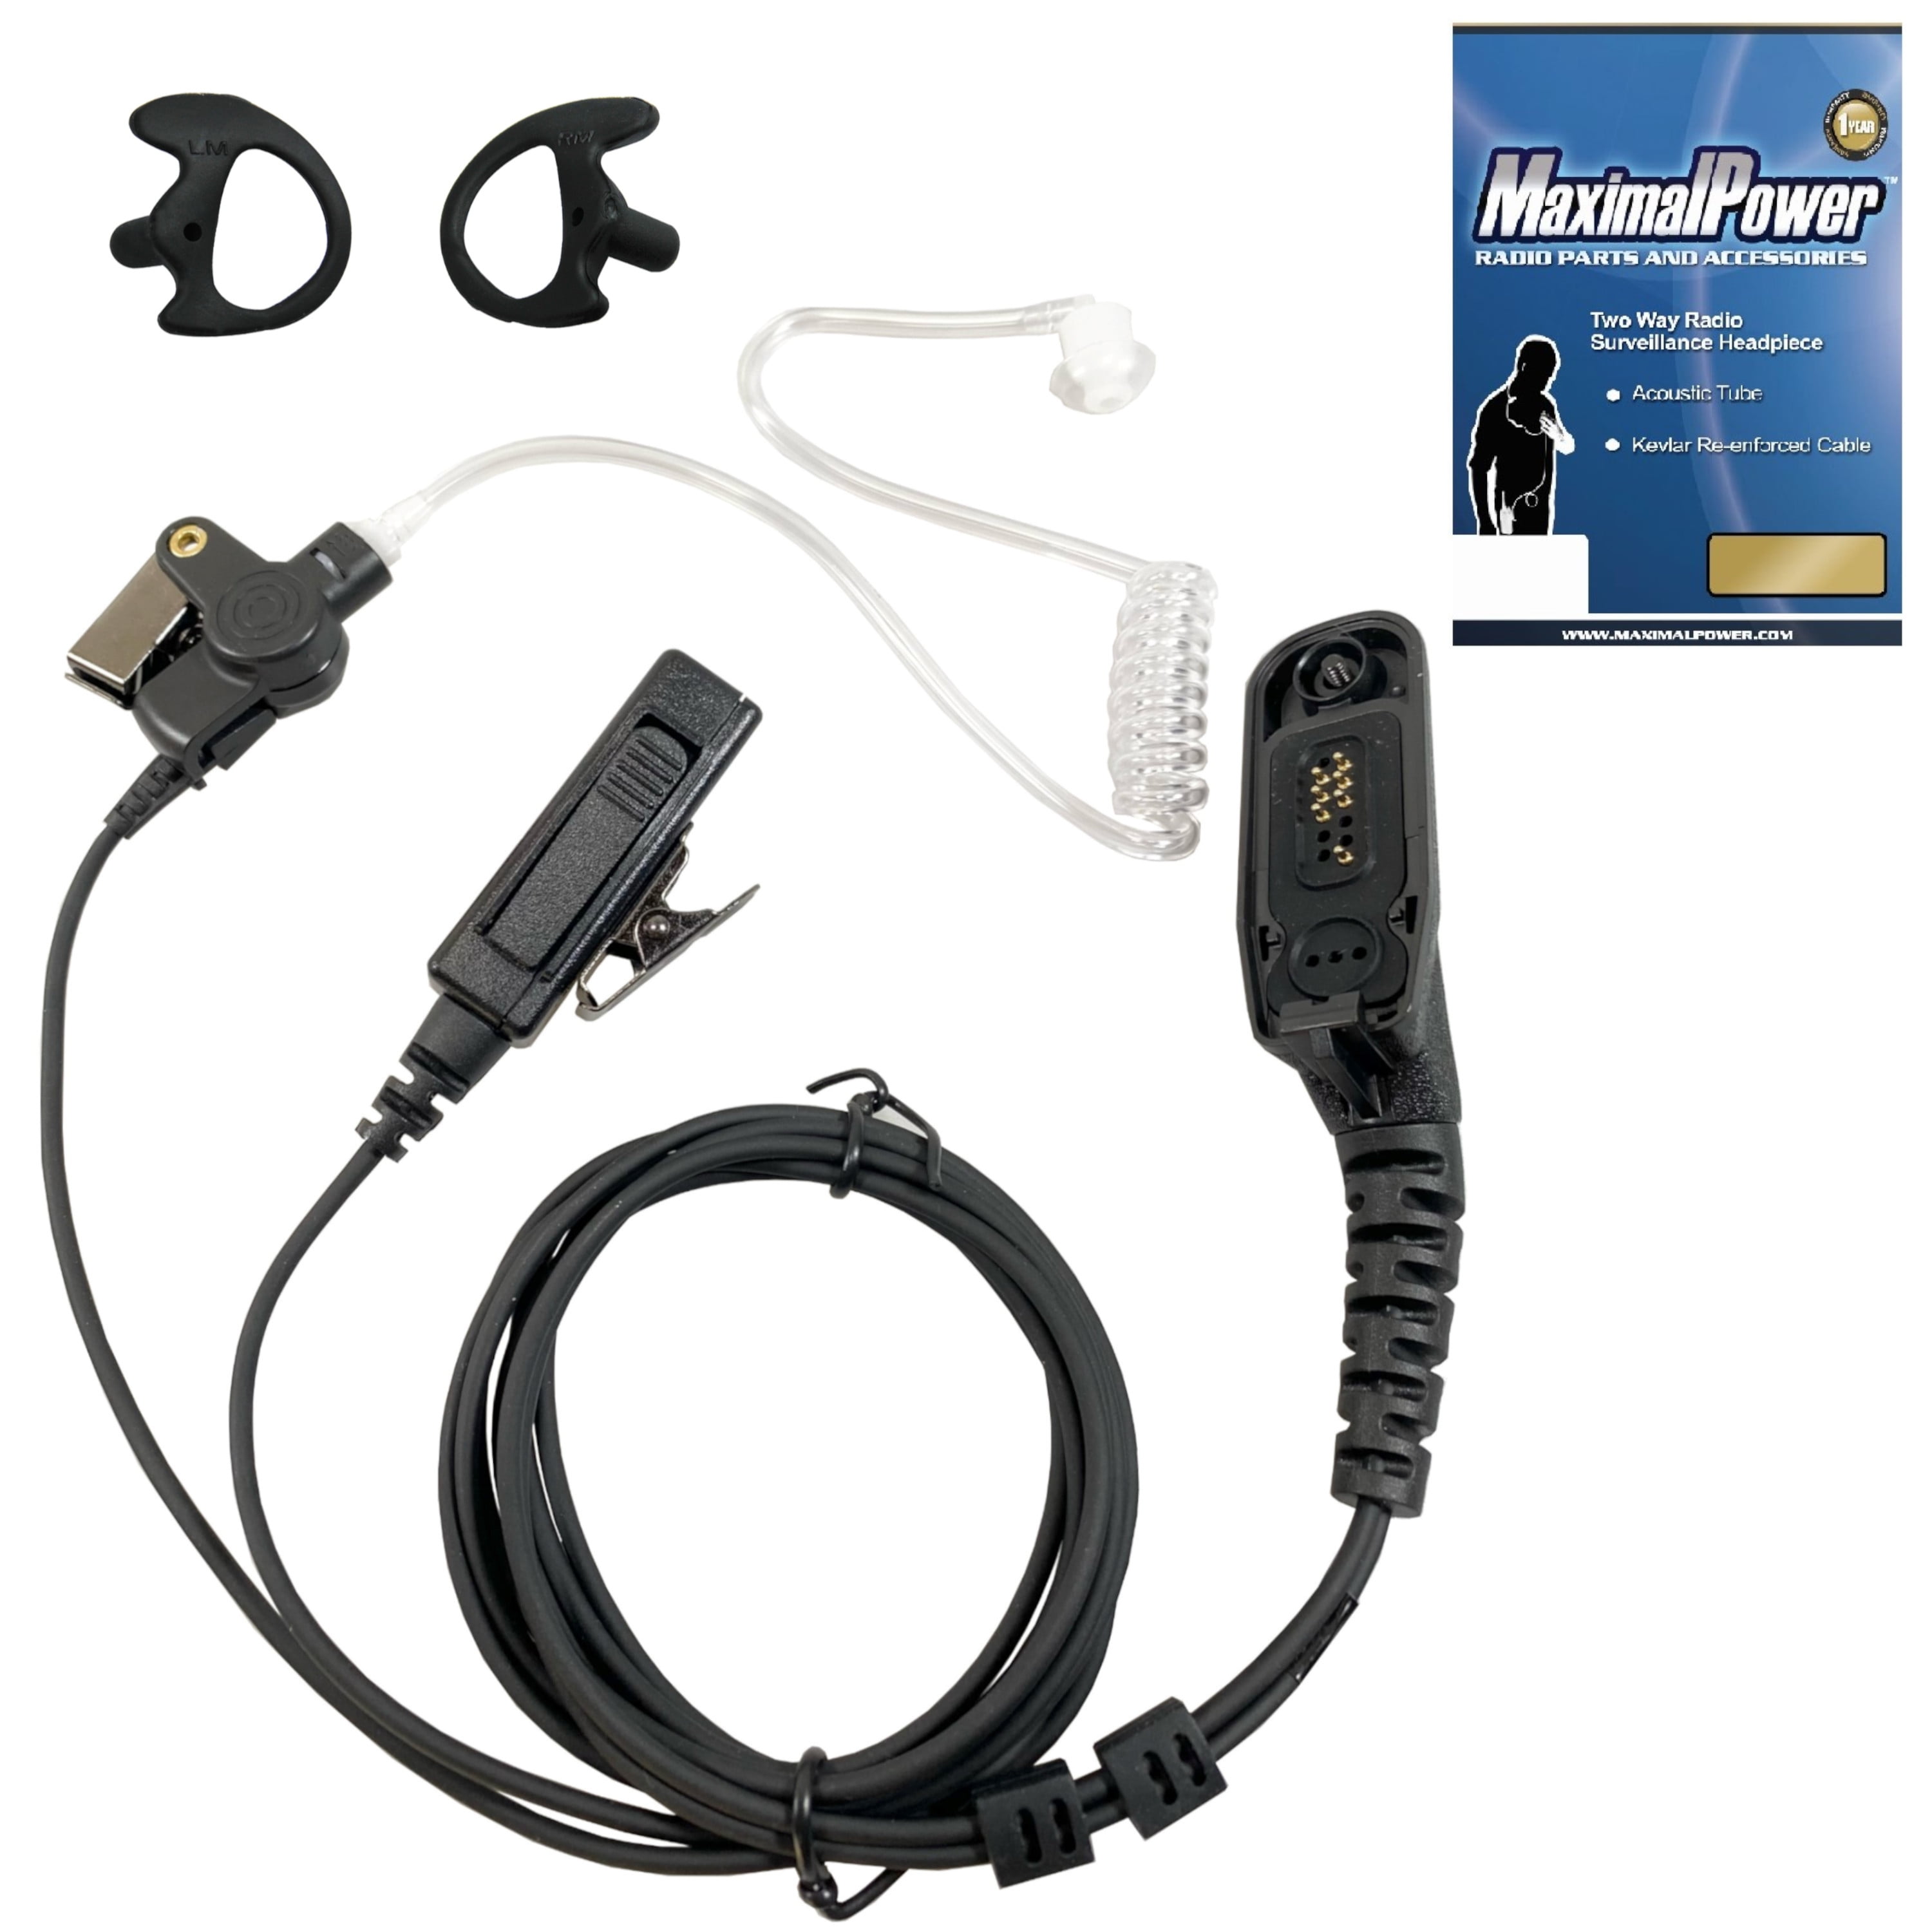 1-wire Headset Earpiece For Motorola XPR6350 XPR6550  XPR6580 XPR7550 Handheld 